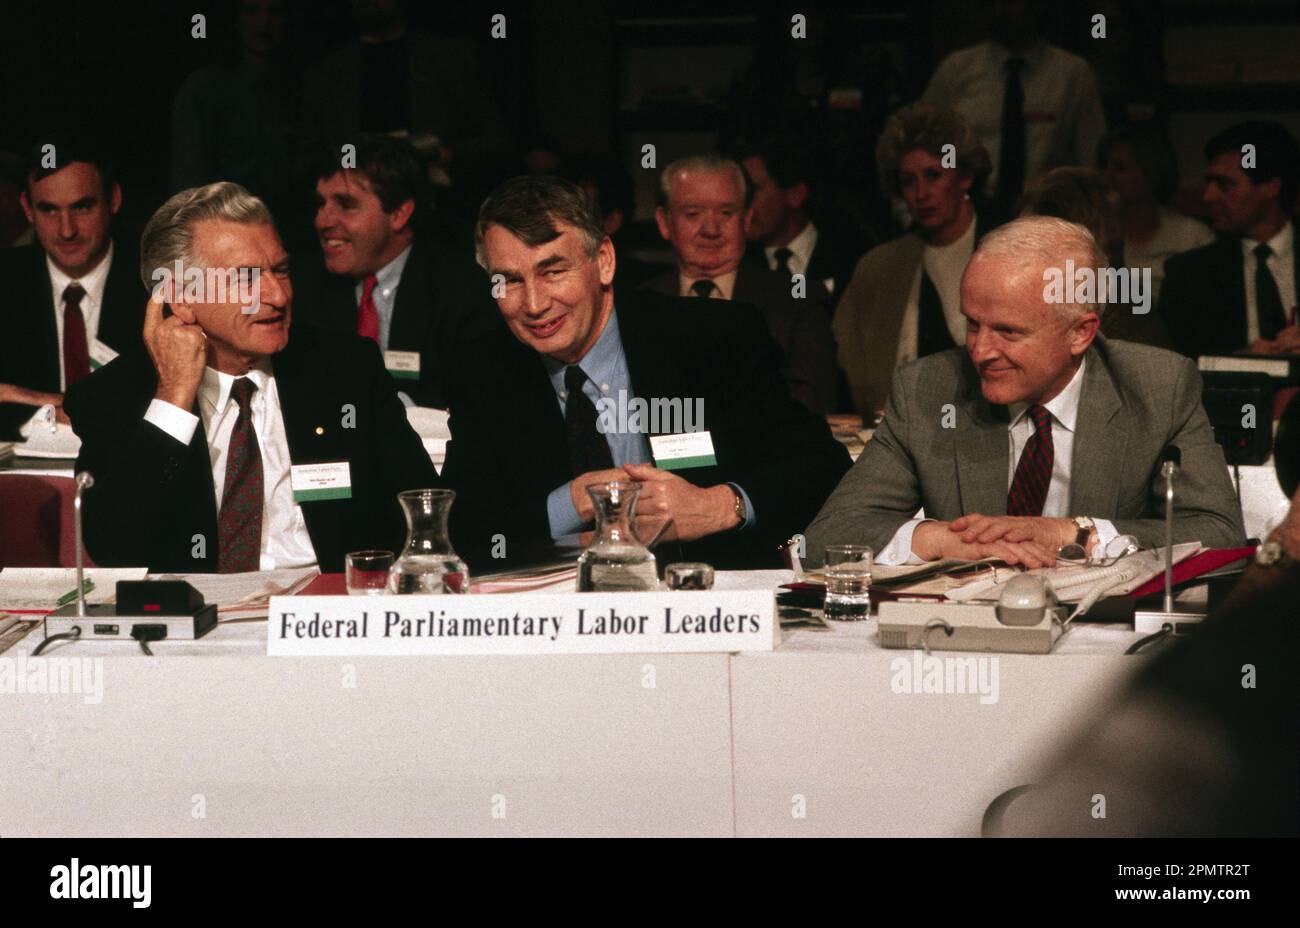 Australian parliamentary Labor leaders, Prime Minister Bob Hawke, deputy PM, Brian Howe and Minister for Commerce and Industry, John Button at the 1991 Australian Labor Party conference at Wrest Point Casino in Hobart, Tasmania Stock Photo